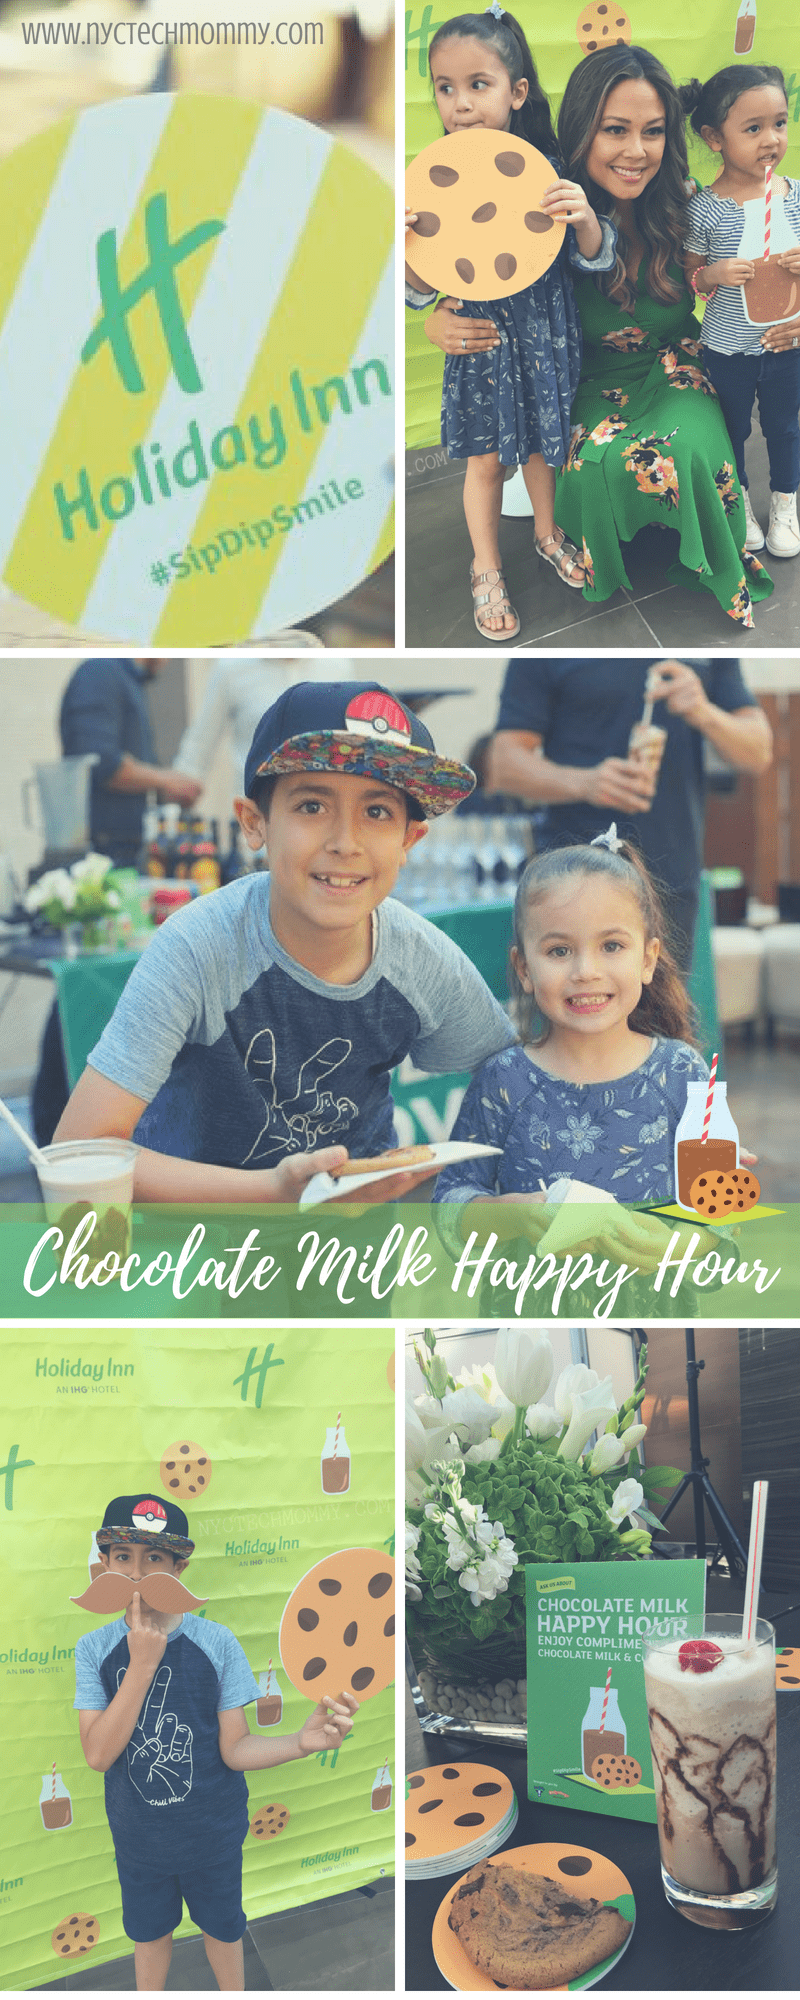 Chocolate Milk Happy Hour - Holiday Inn makes family travel a little sweeter this summer!